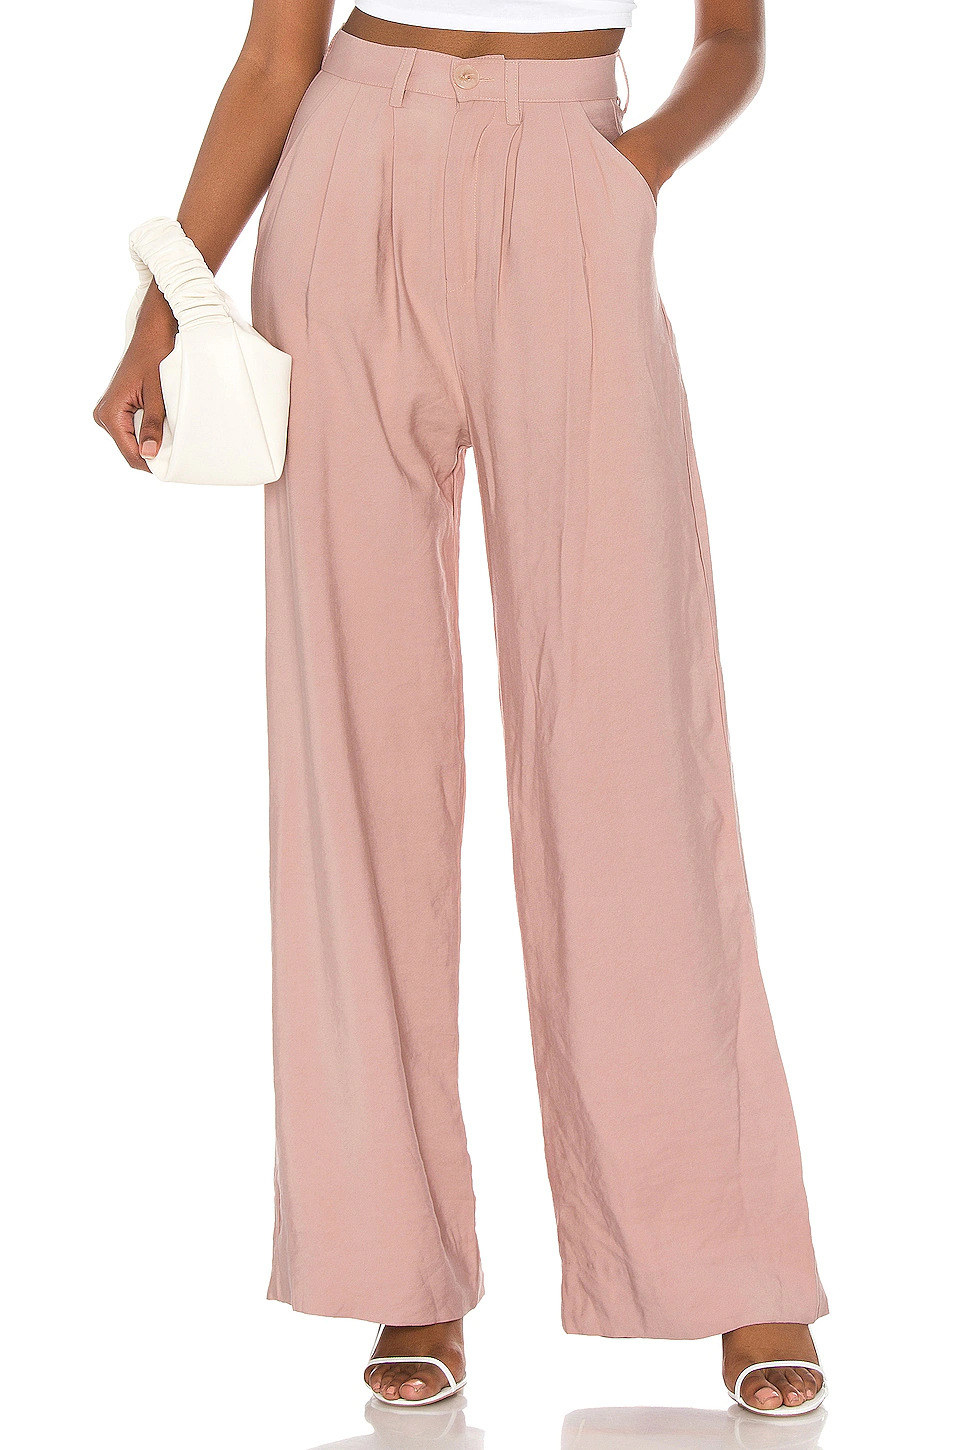 Model wearing light pink pants with pockets